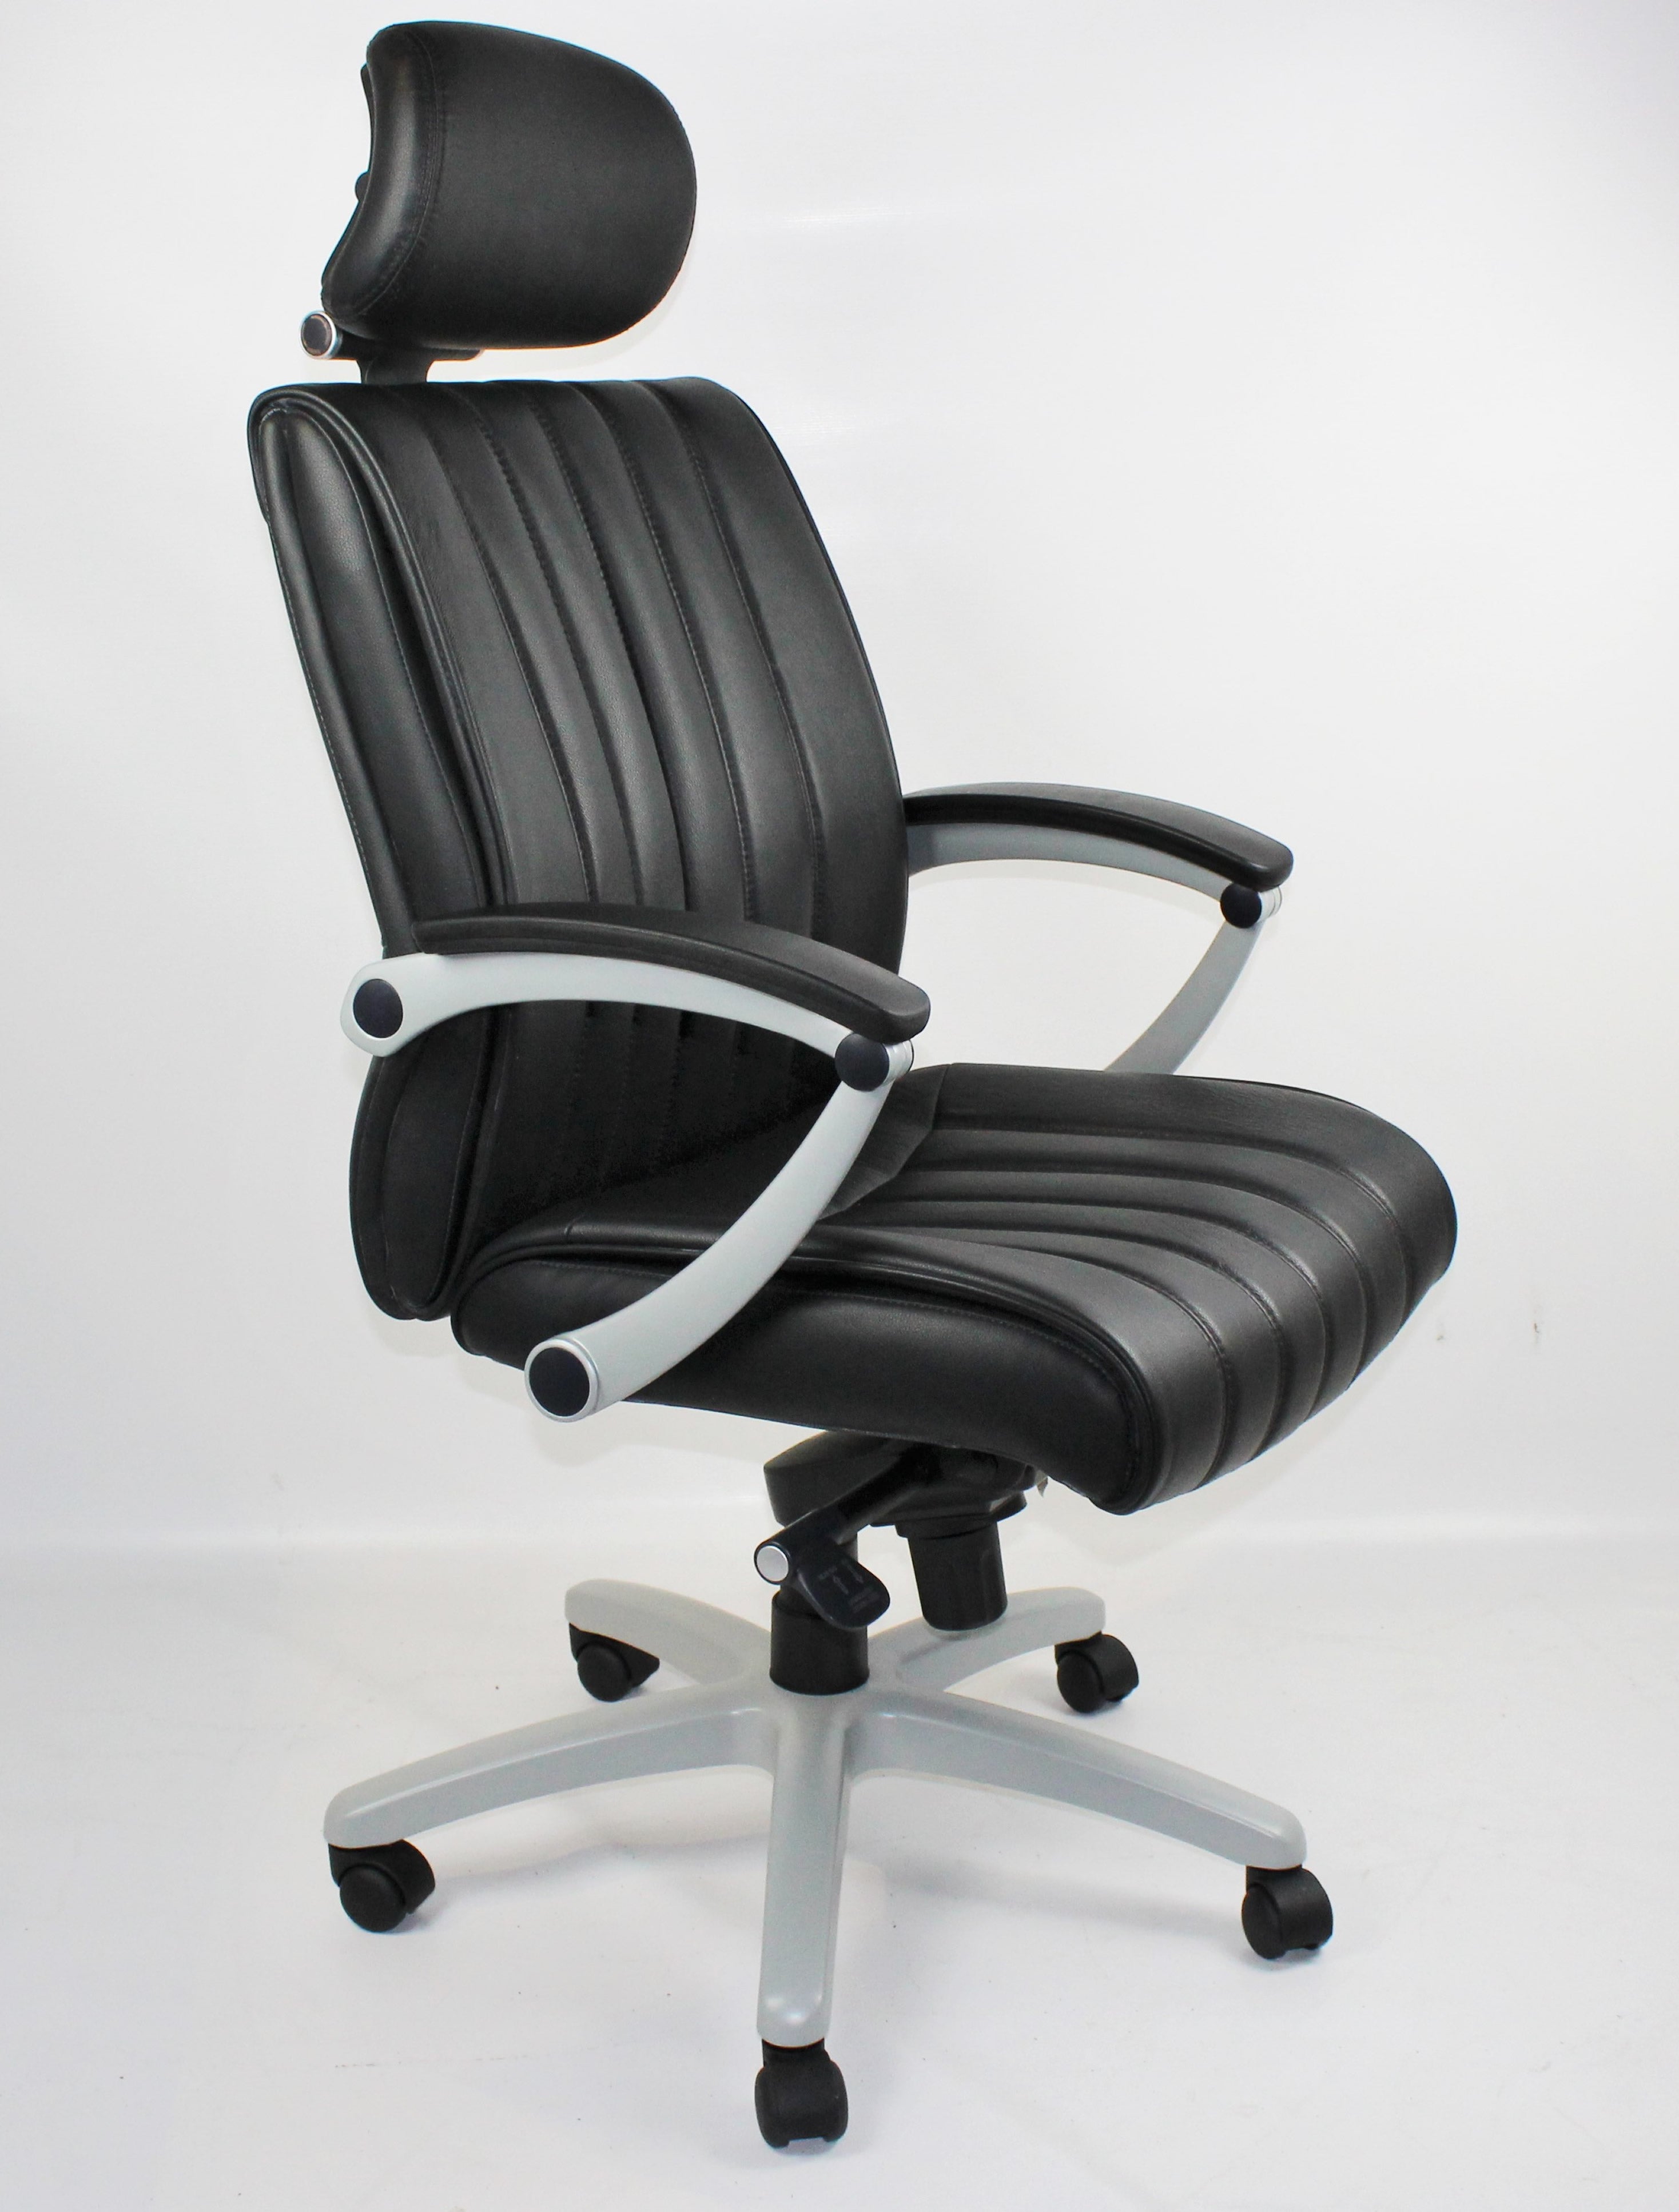 Real Leather Quality Office Chair With Headrest BJ016HL